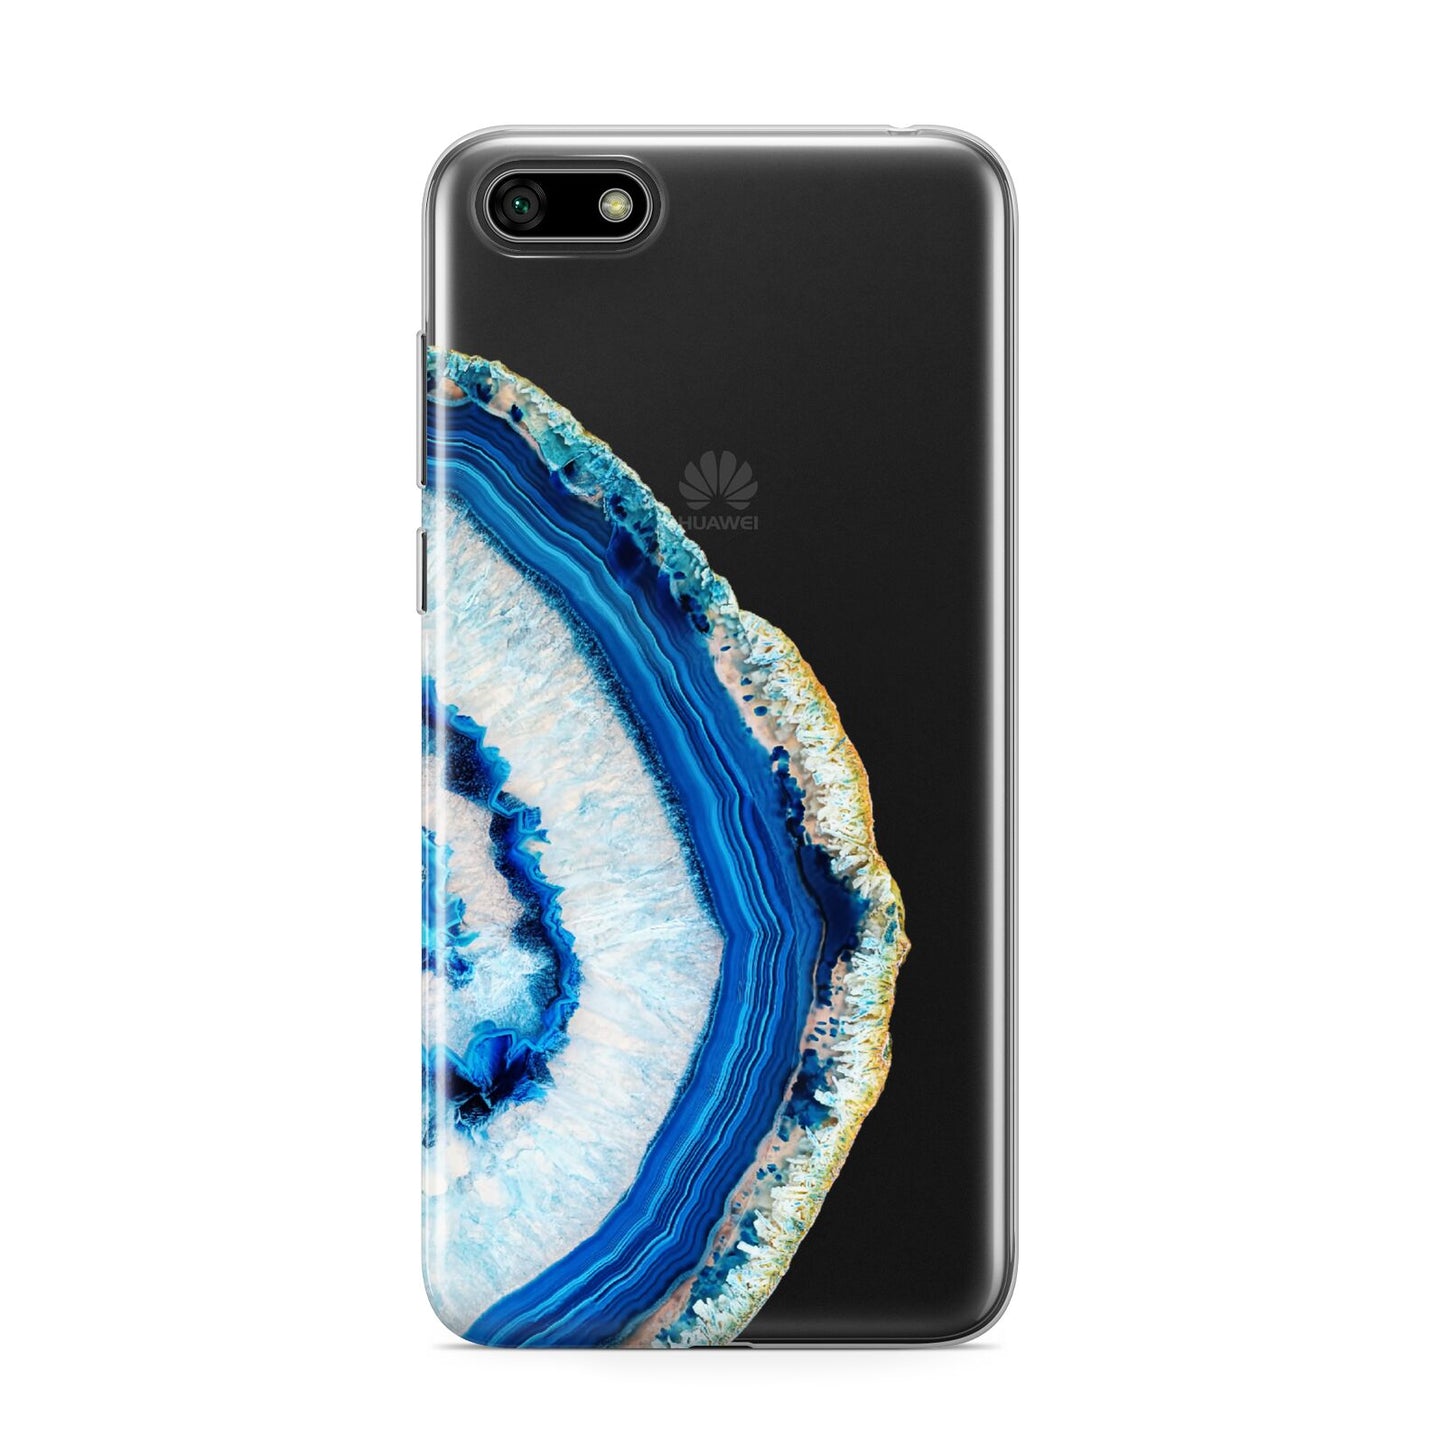 Agate Dark Blue and Turquoise Huawei Y5 Prime 2018 Phone Case